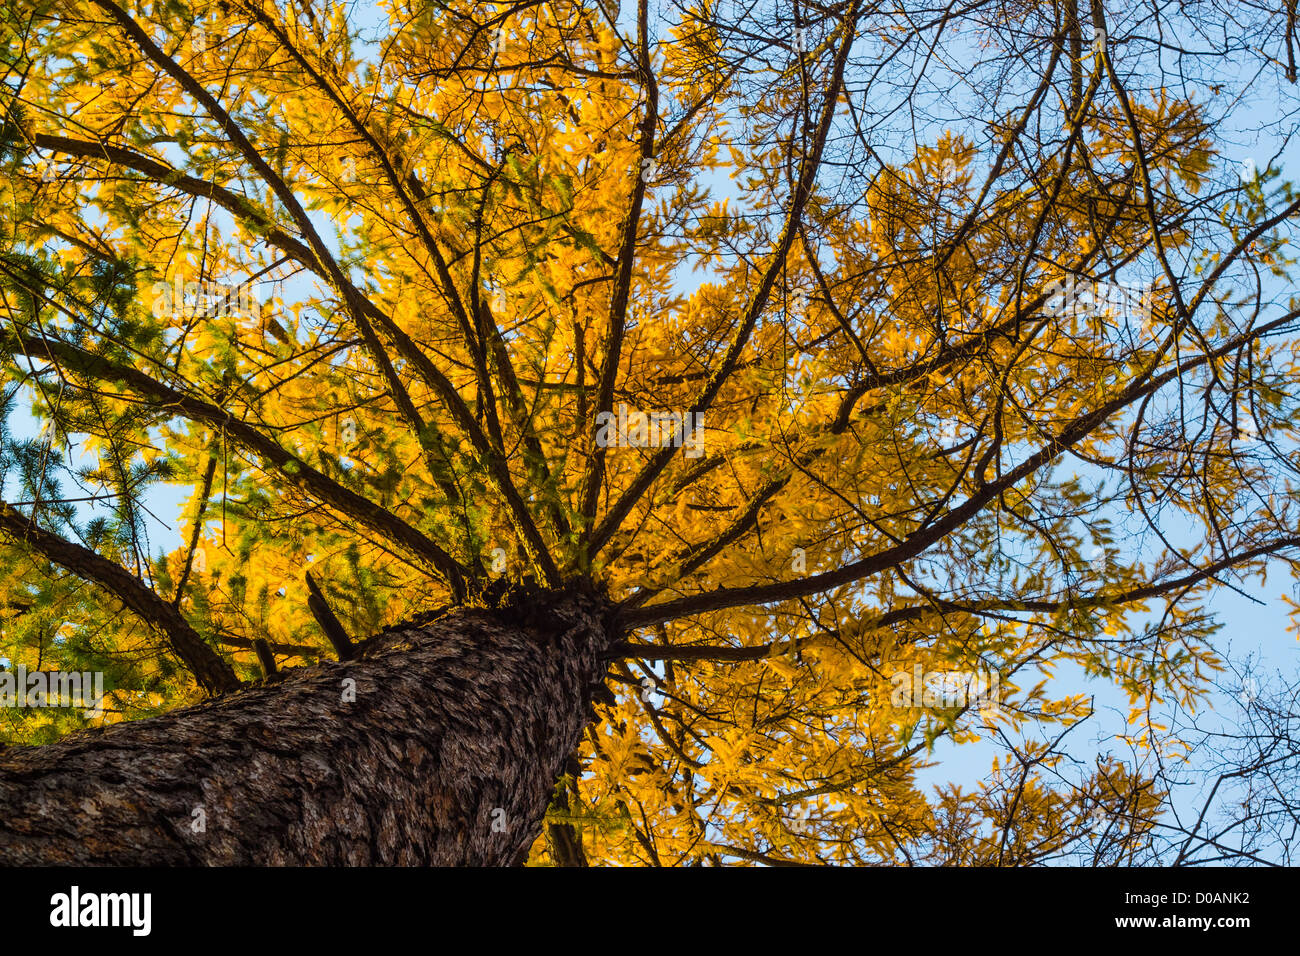 Crohn larch in autumn bright yellow against the blue sky Stock Photo